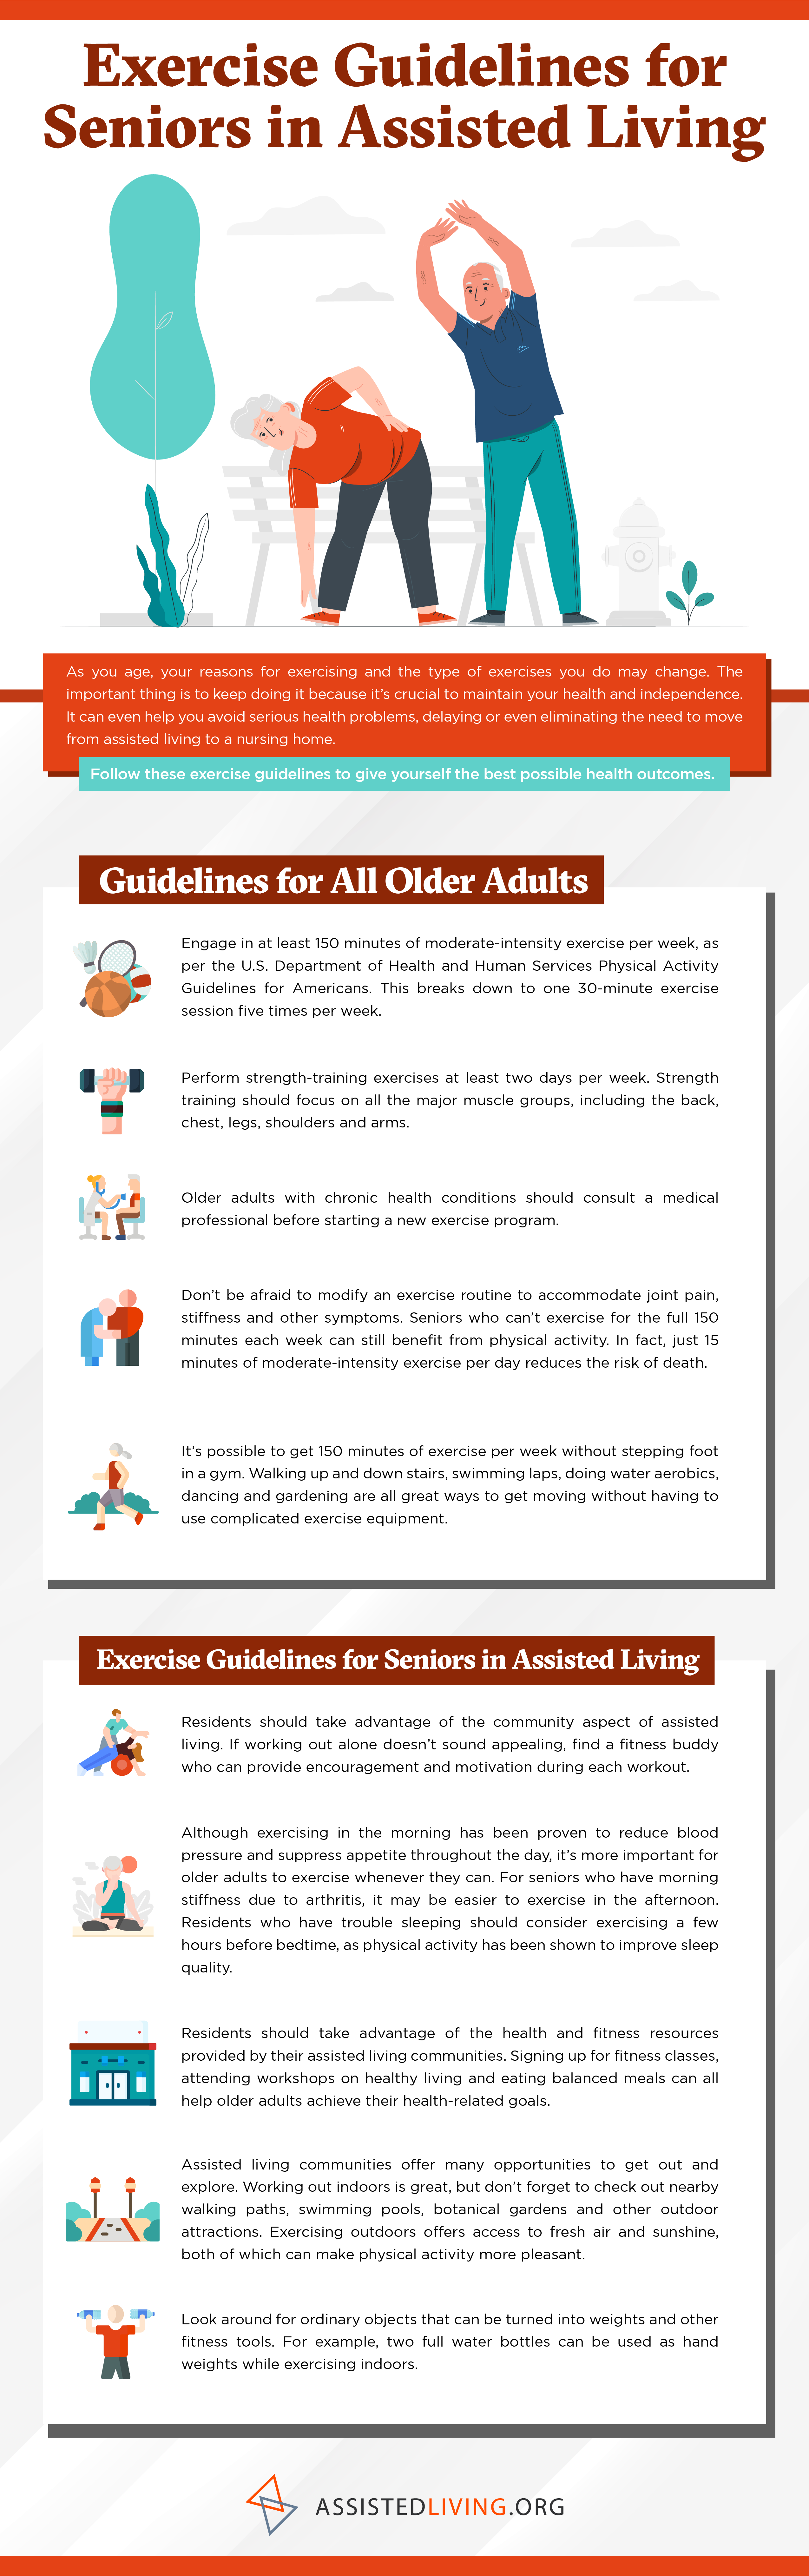 The Best Kinds of Exercises for Seniors